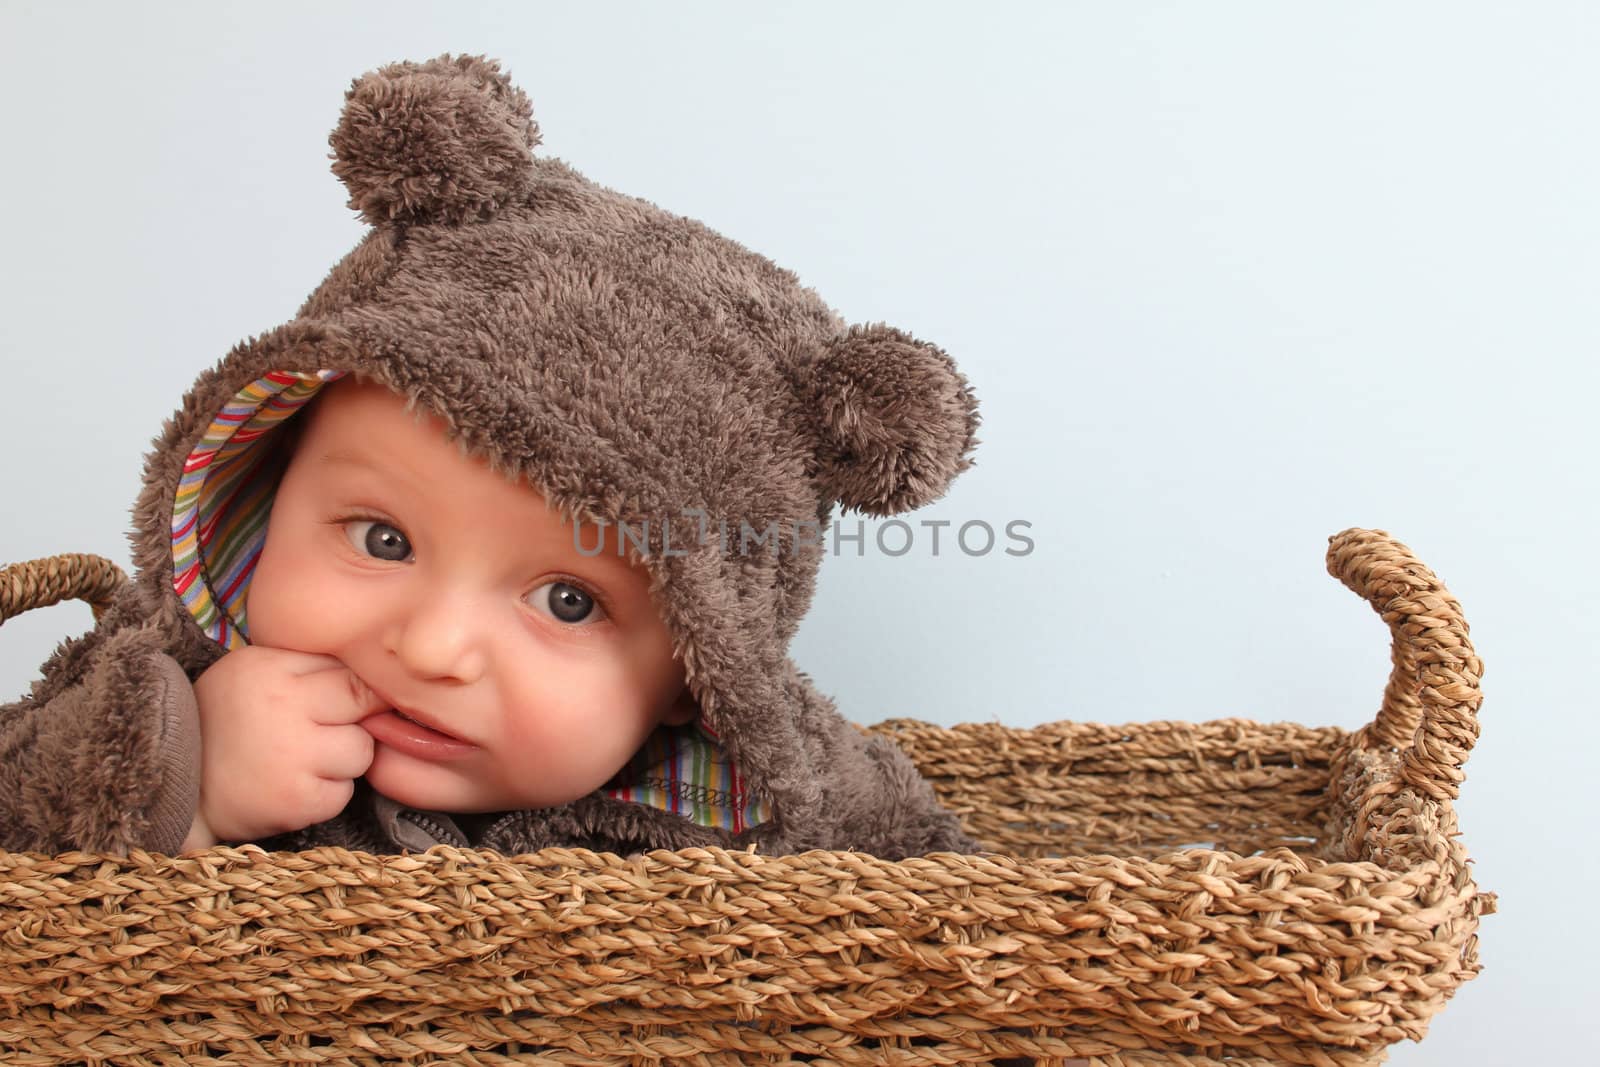 Baby bear by vanell